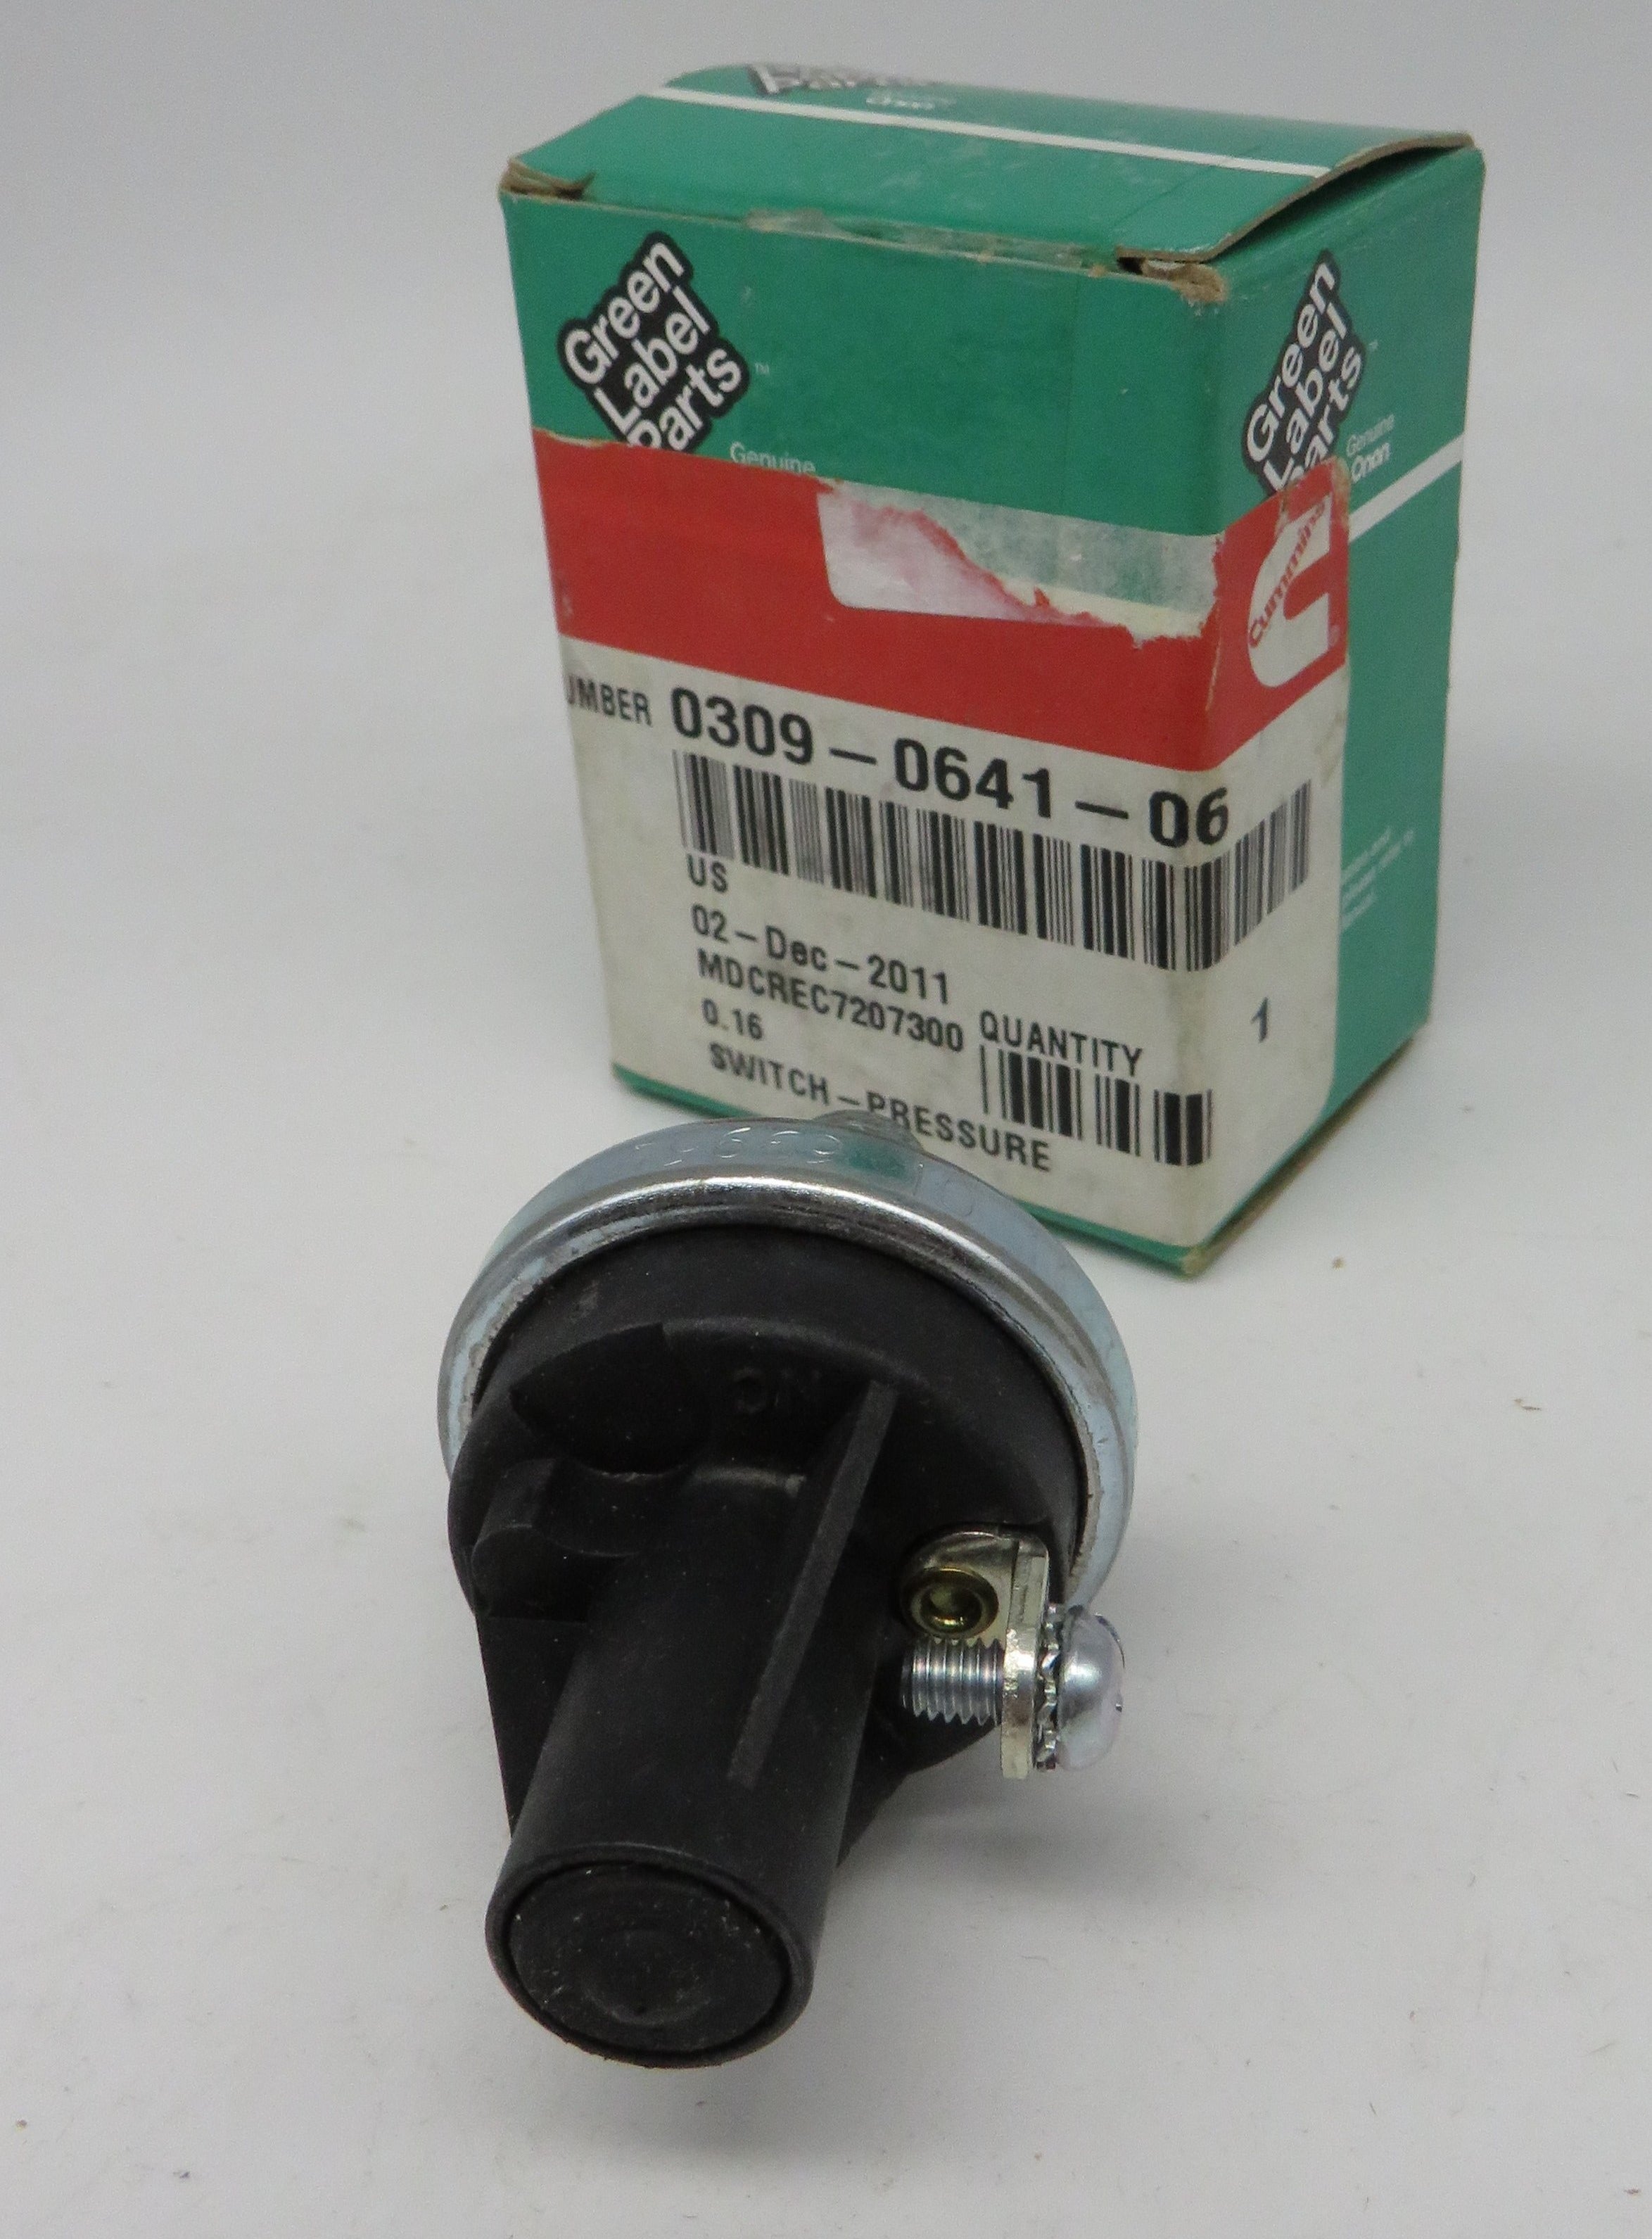 309-0641-06 Onan Pressure Switch Rated at 10 Psi OBSOLETE (Replaces 309-0578) 